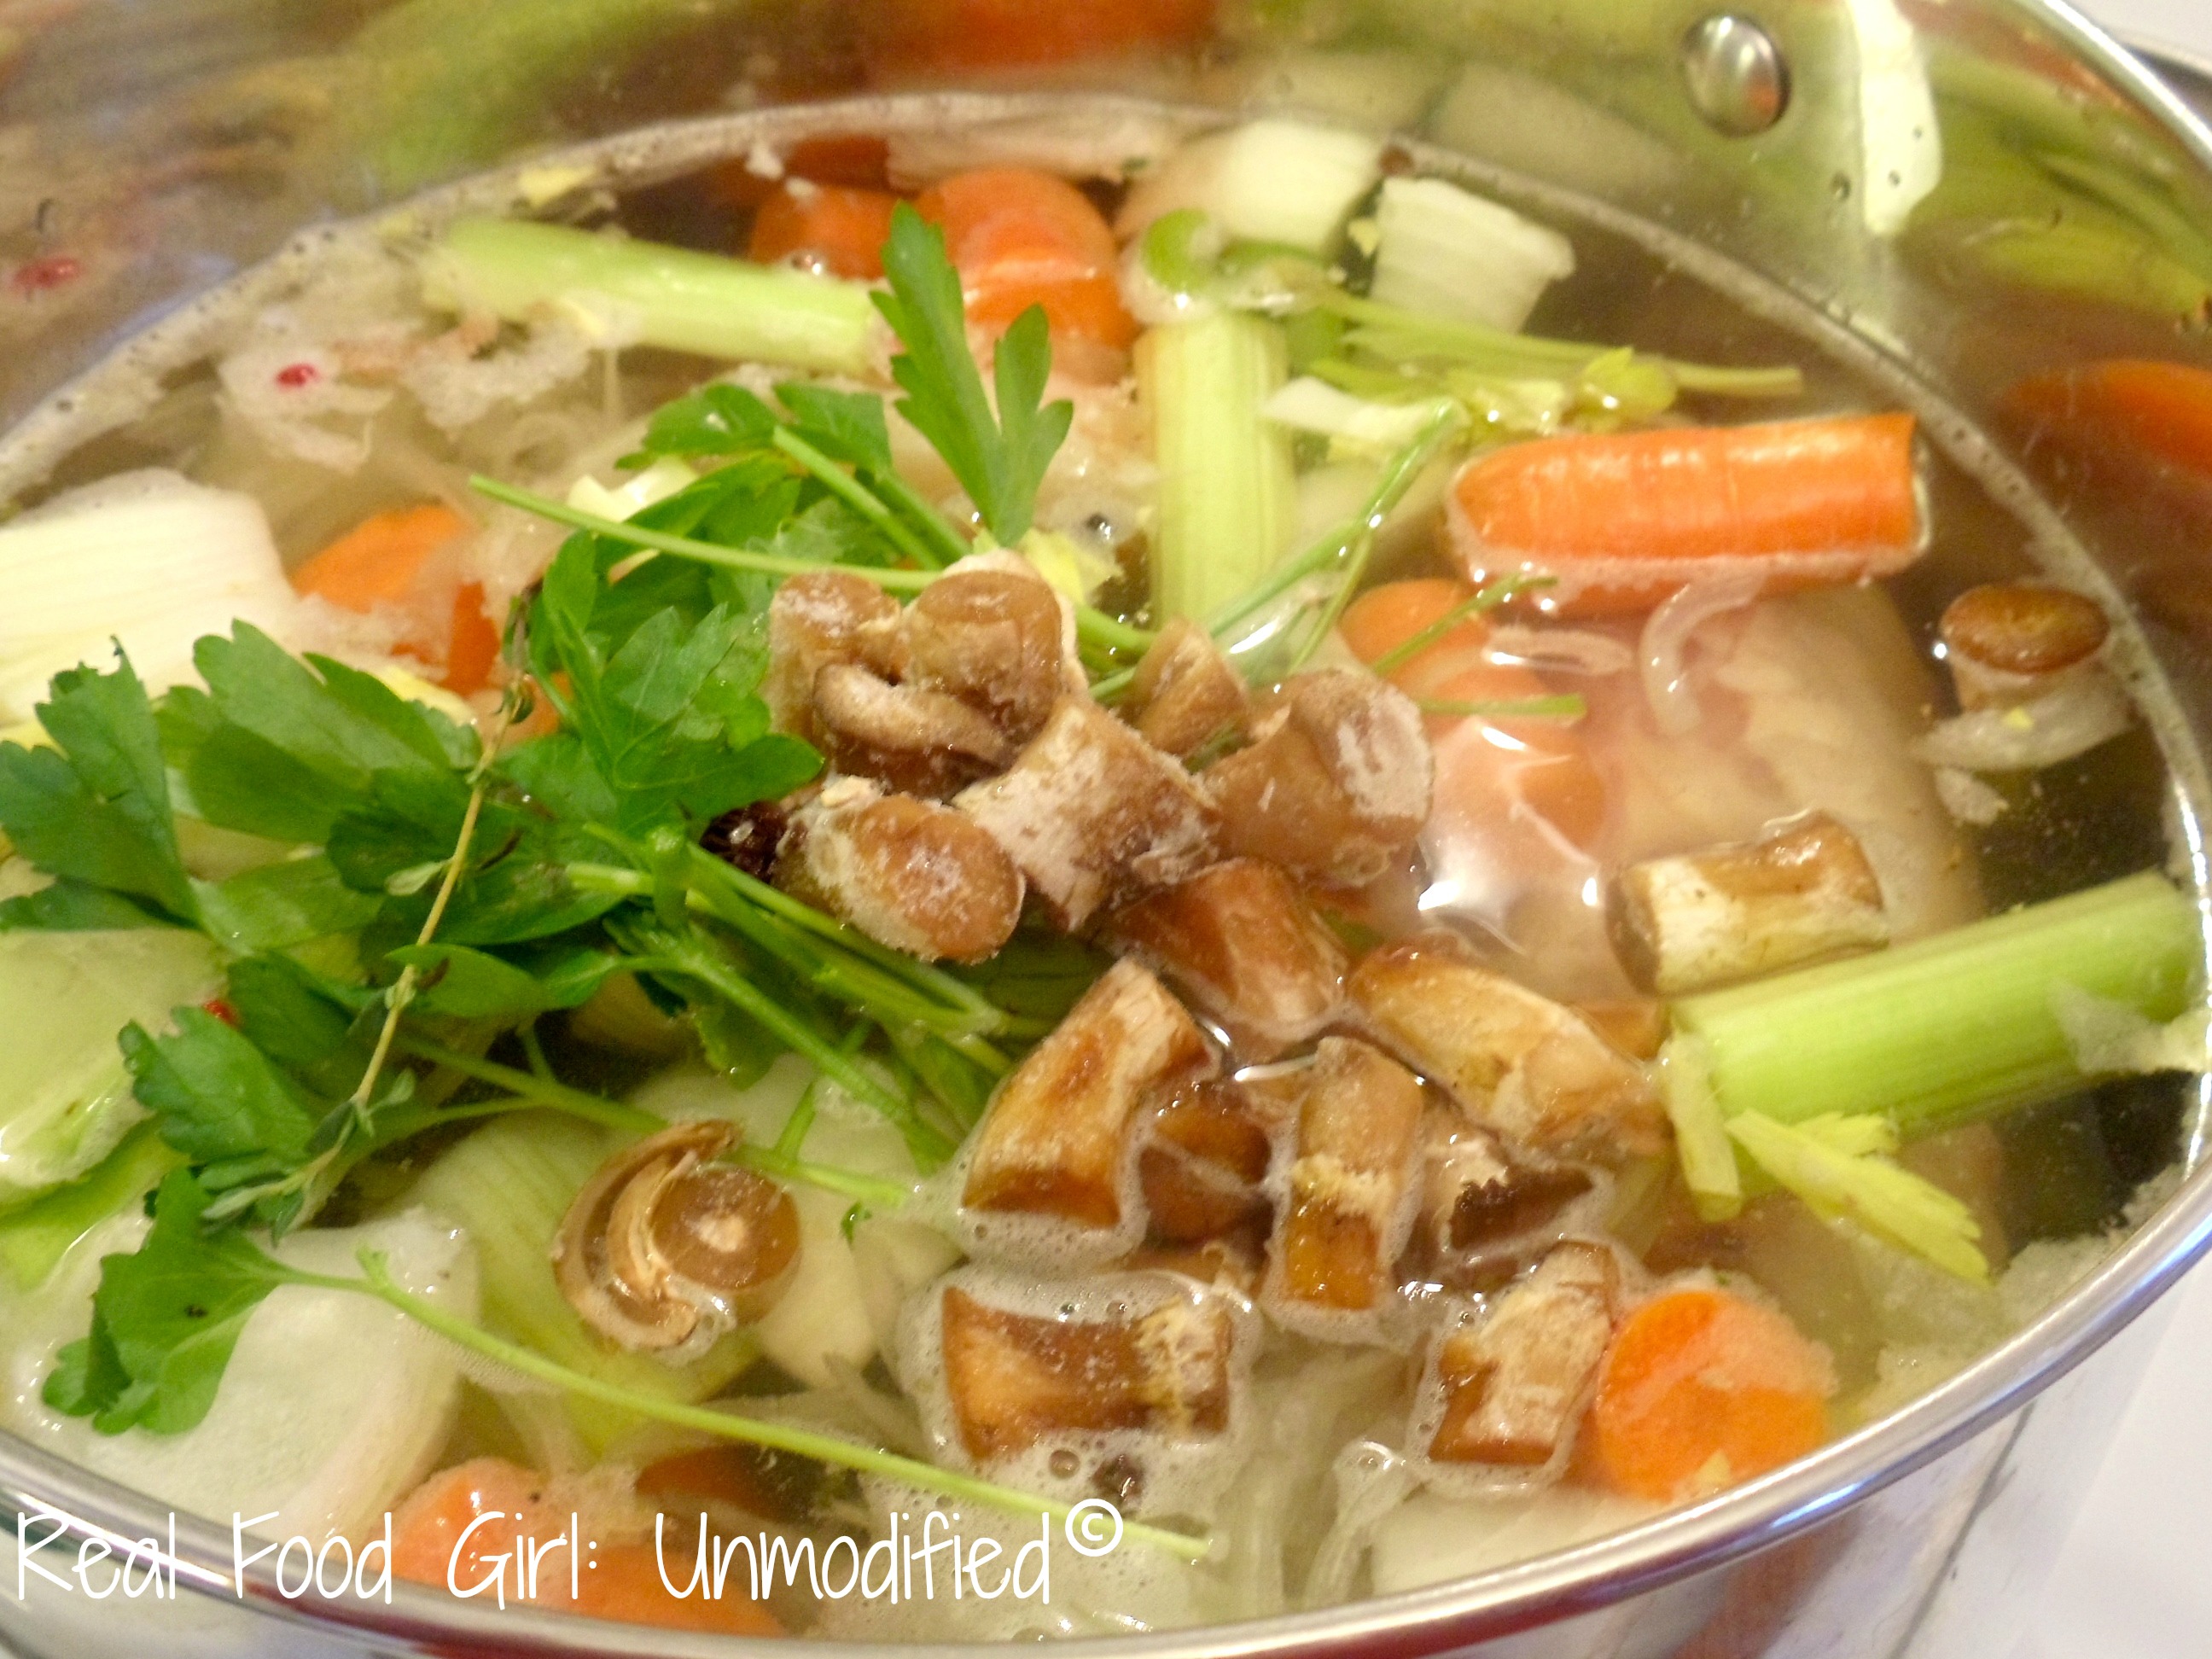 Homemade Non-GMO Beef Stock. Easy to make and tastes so much better than canned, or boxed stocks. Much healthier, too! Real Food Girl: Unmodified